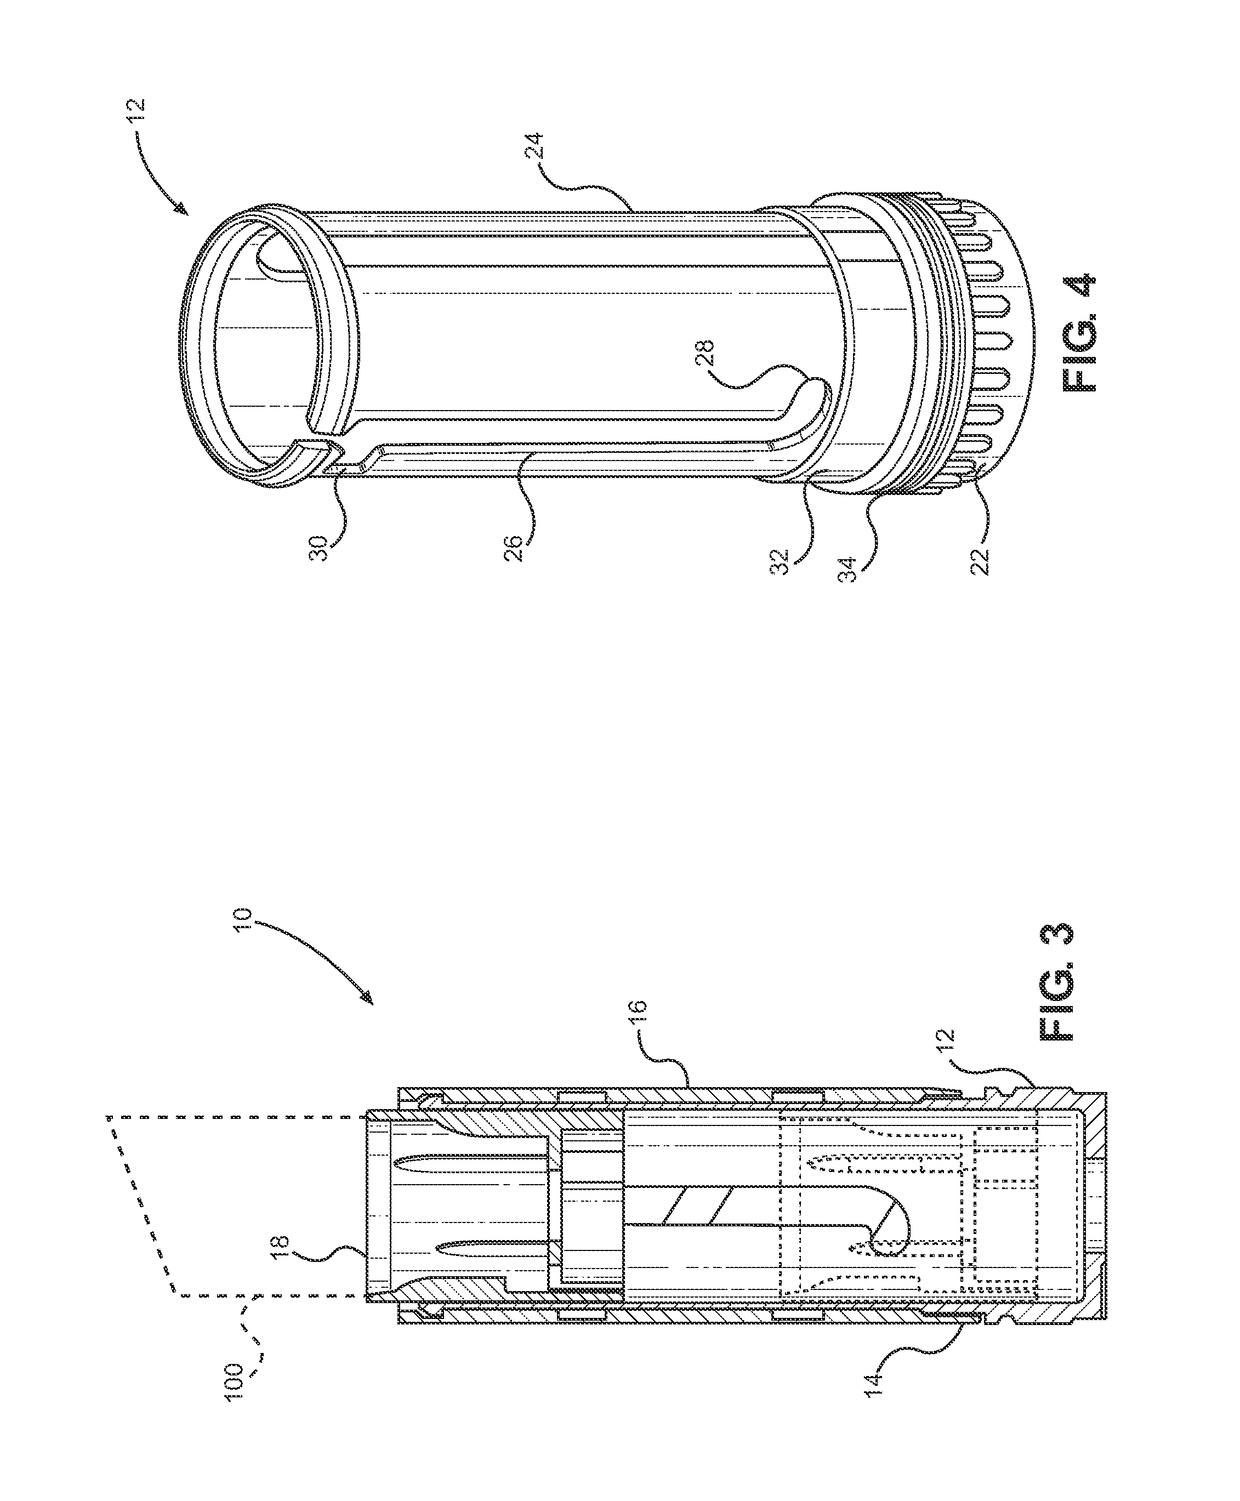 Cosmetic dispenser with crenelated wall for frictional resistance